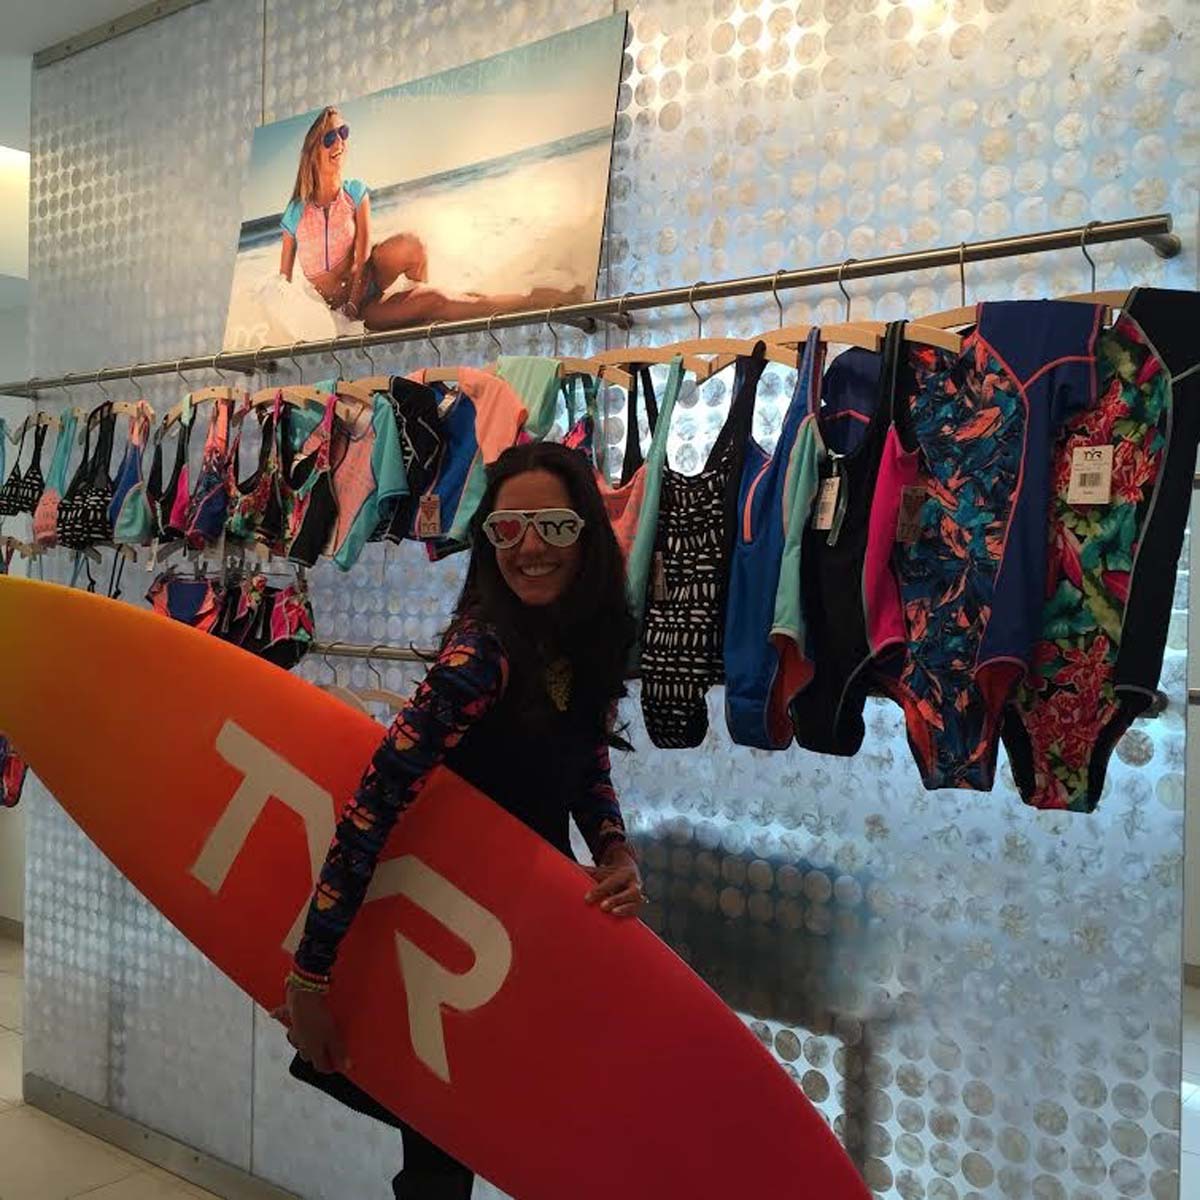 https://www.swimmingworldmagazine.com/news/tyr-sport-launches-new-springsummer-apparel-collection-in-new-york-city/tyr-apparel-launch-2015-5/